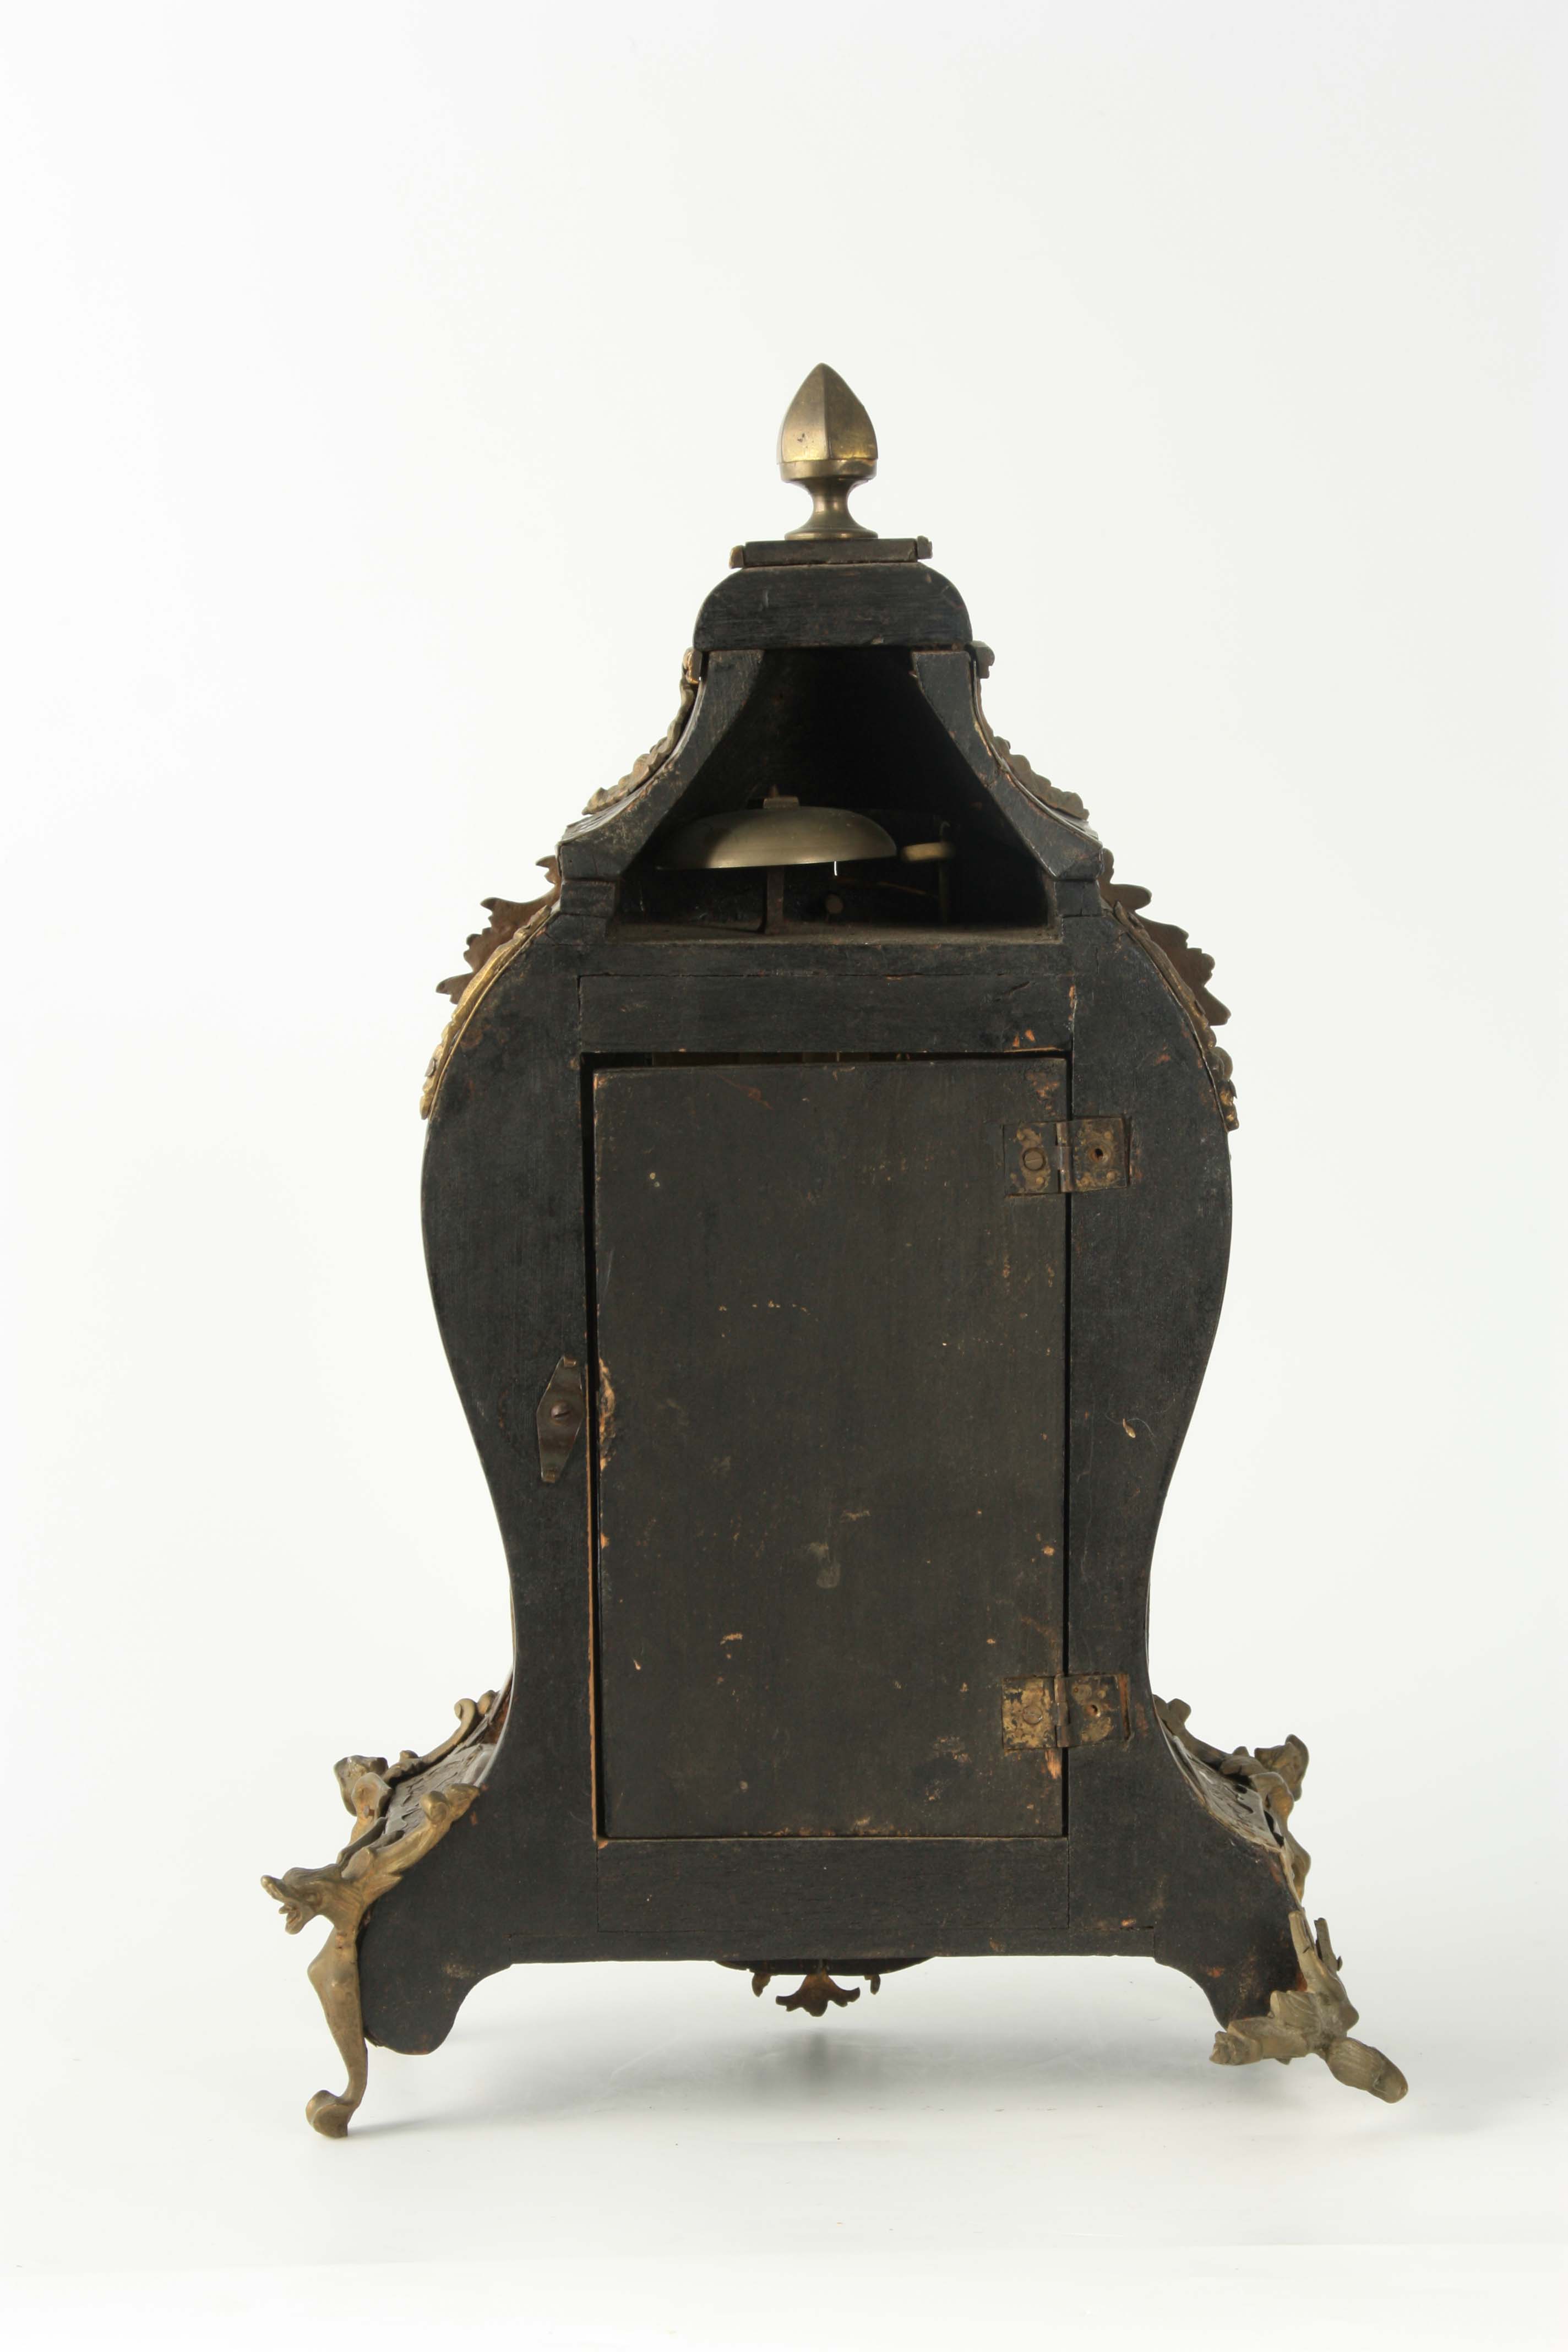 GROGNIE, A PARIS. AN EARLY 19TH CENTURY FRENCH CONTRA BOULLE MANTEL CLOCK the balloon-shaped case - Image 5 of 7